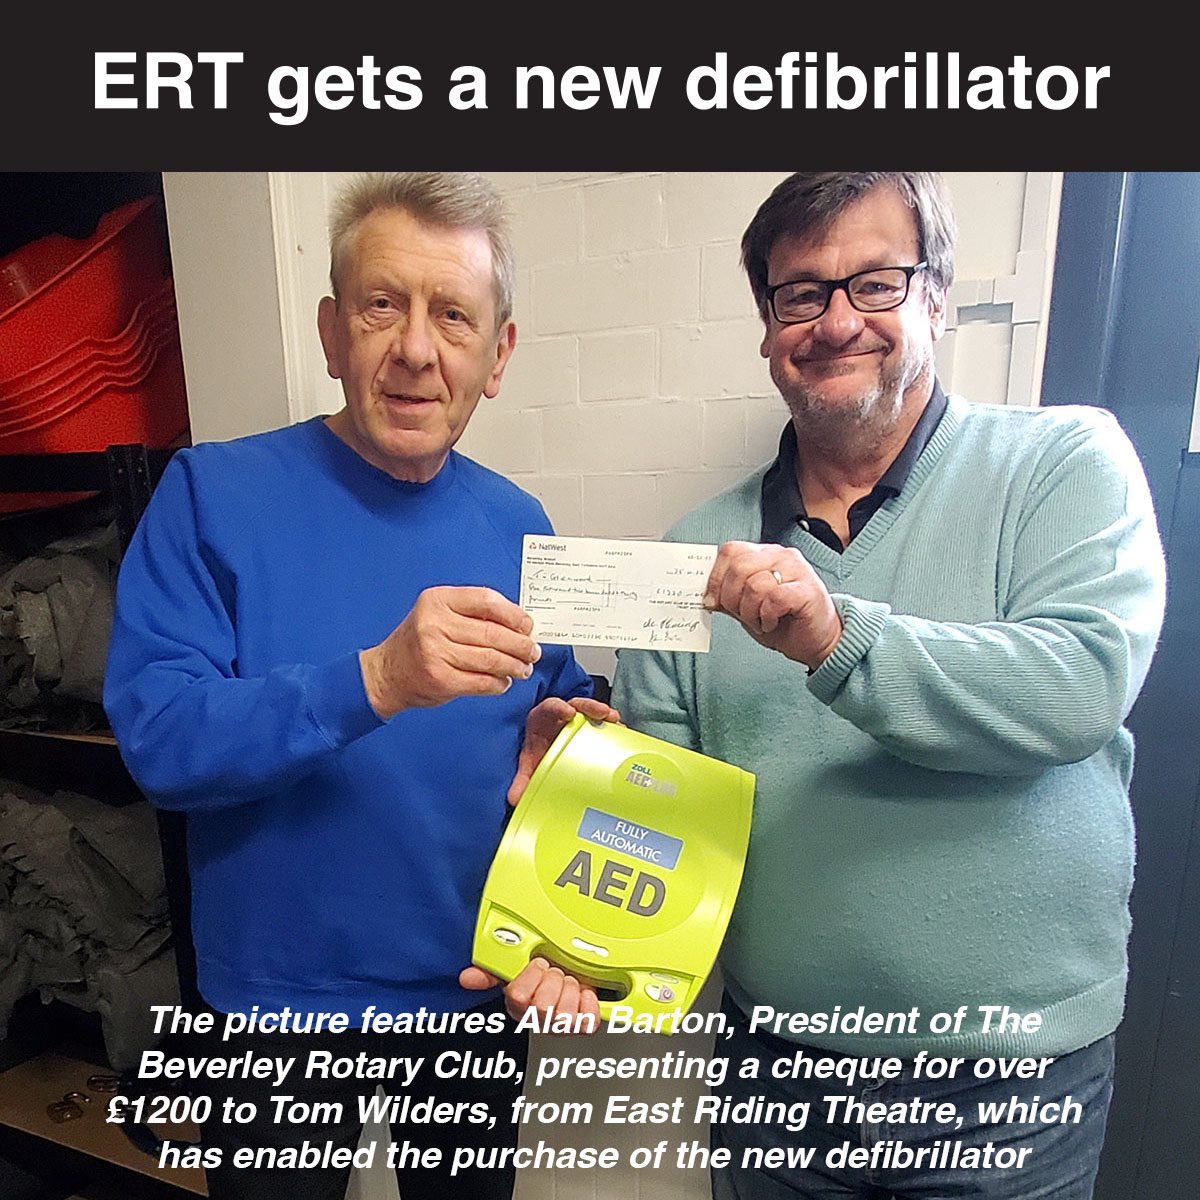 We are pleased to announce that a new defibrillator is now available for use at the theatre in the event of an emergency. It has been funded by the Beverley Rotary Club by raising funds from a variety of events. Defibrillators can increase survival rates by as much as 60%.